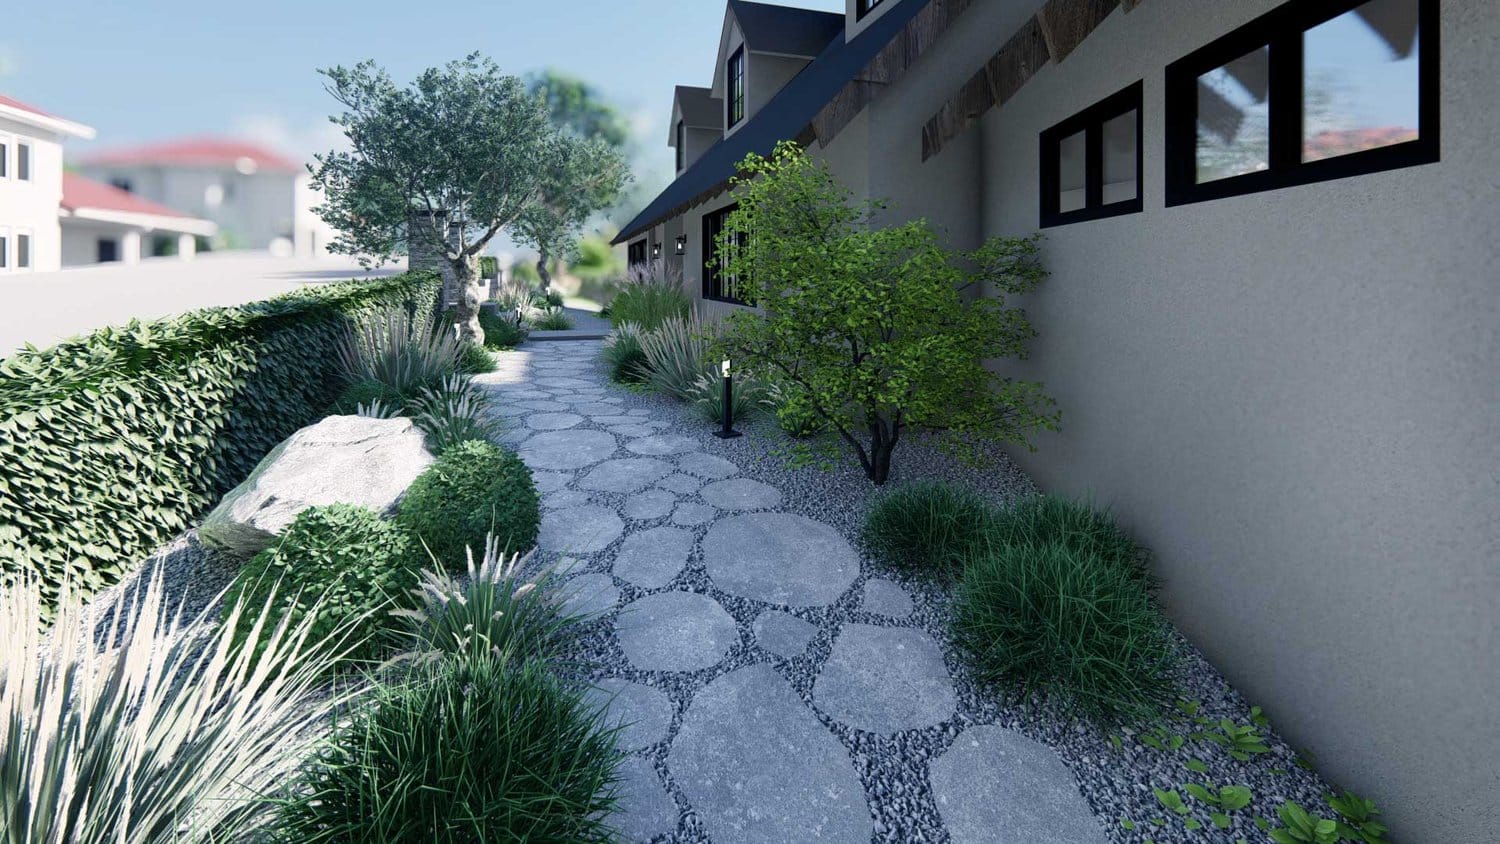 Los Angeles side yard with trees, drought tolerant grass in gravel, hedge fence and stone pathway